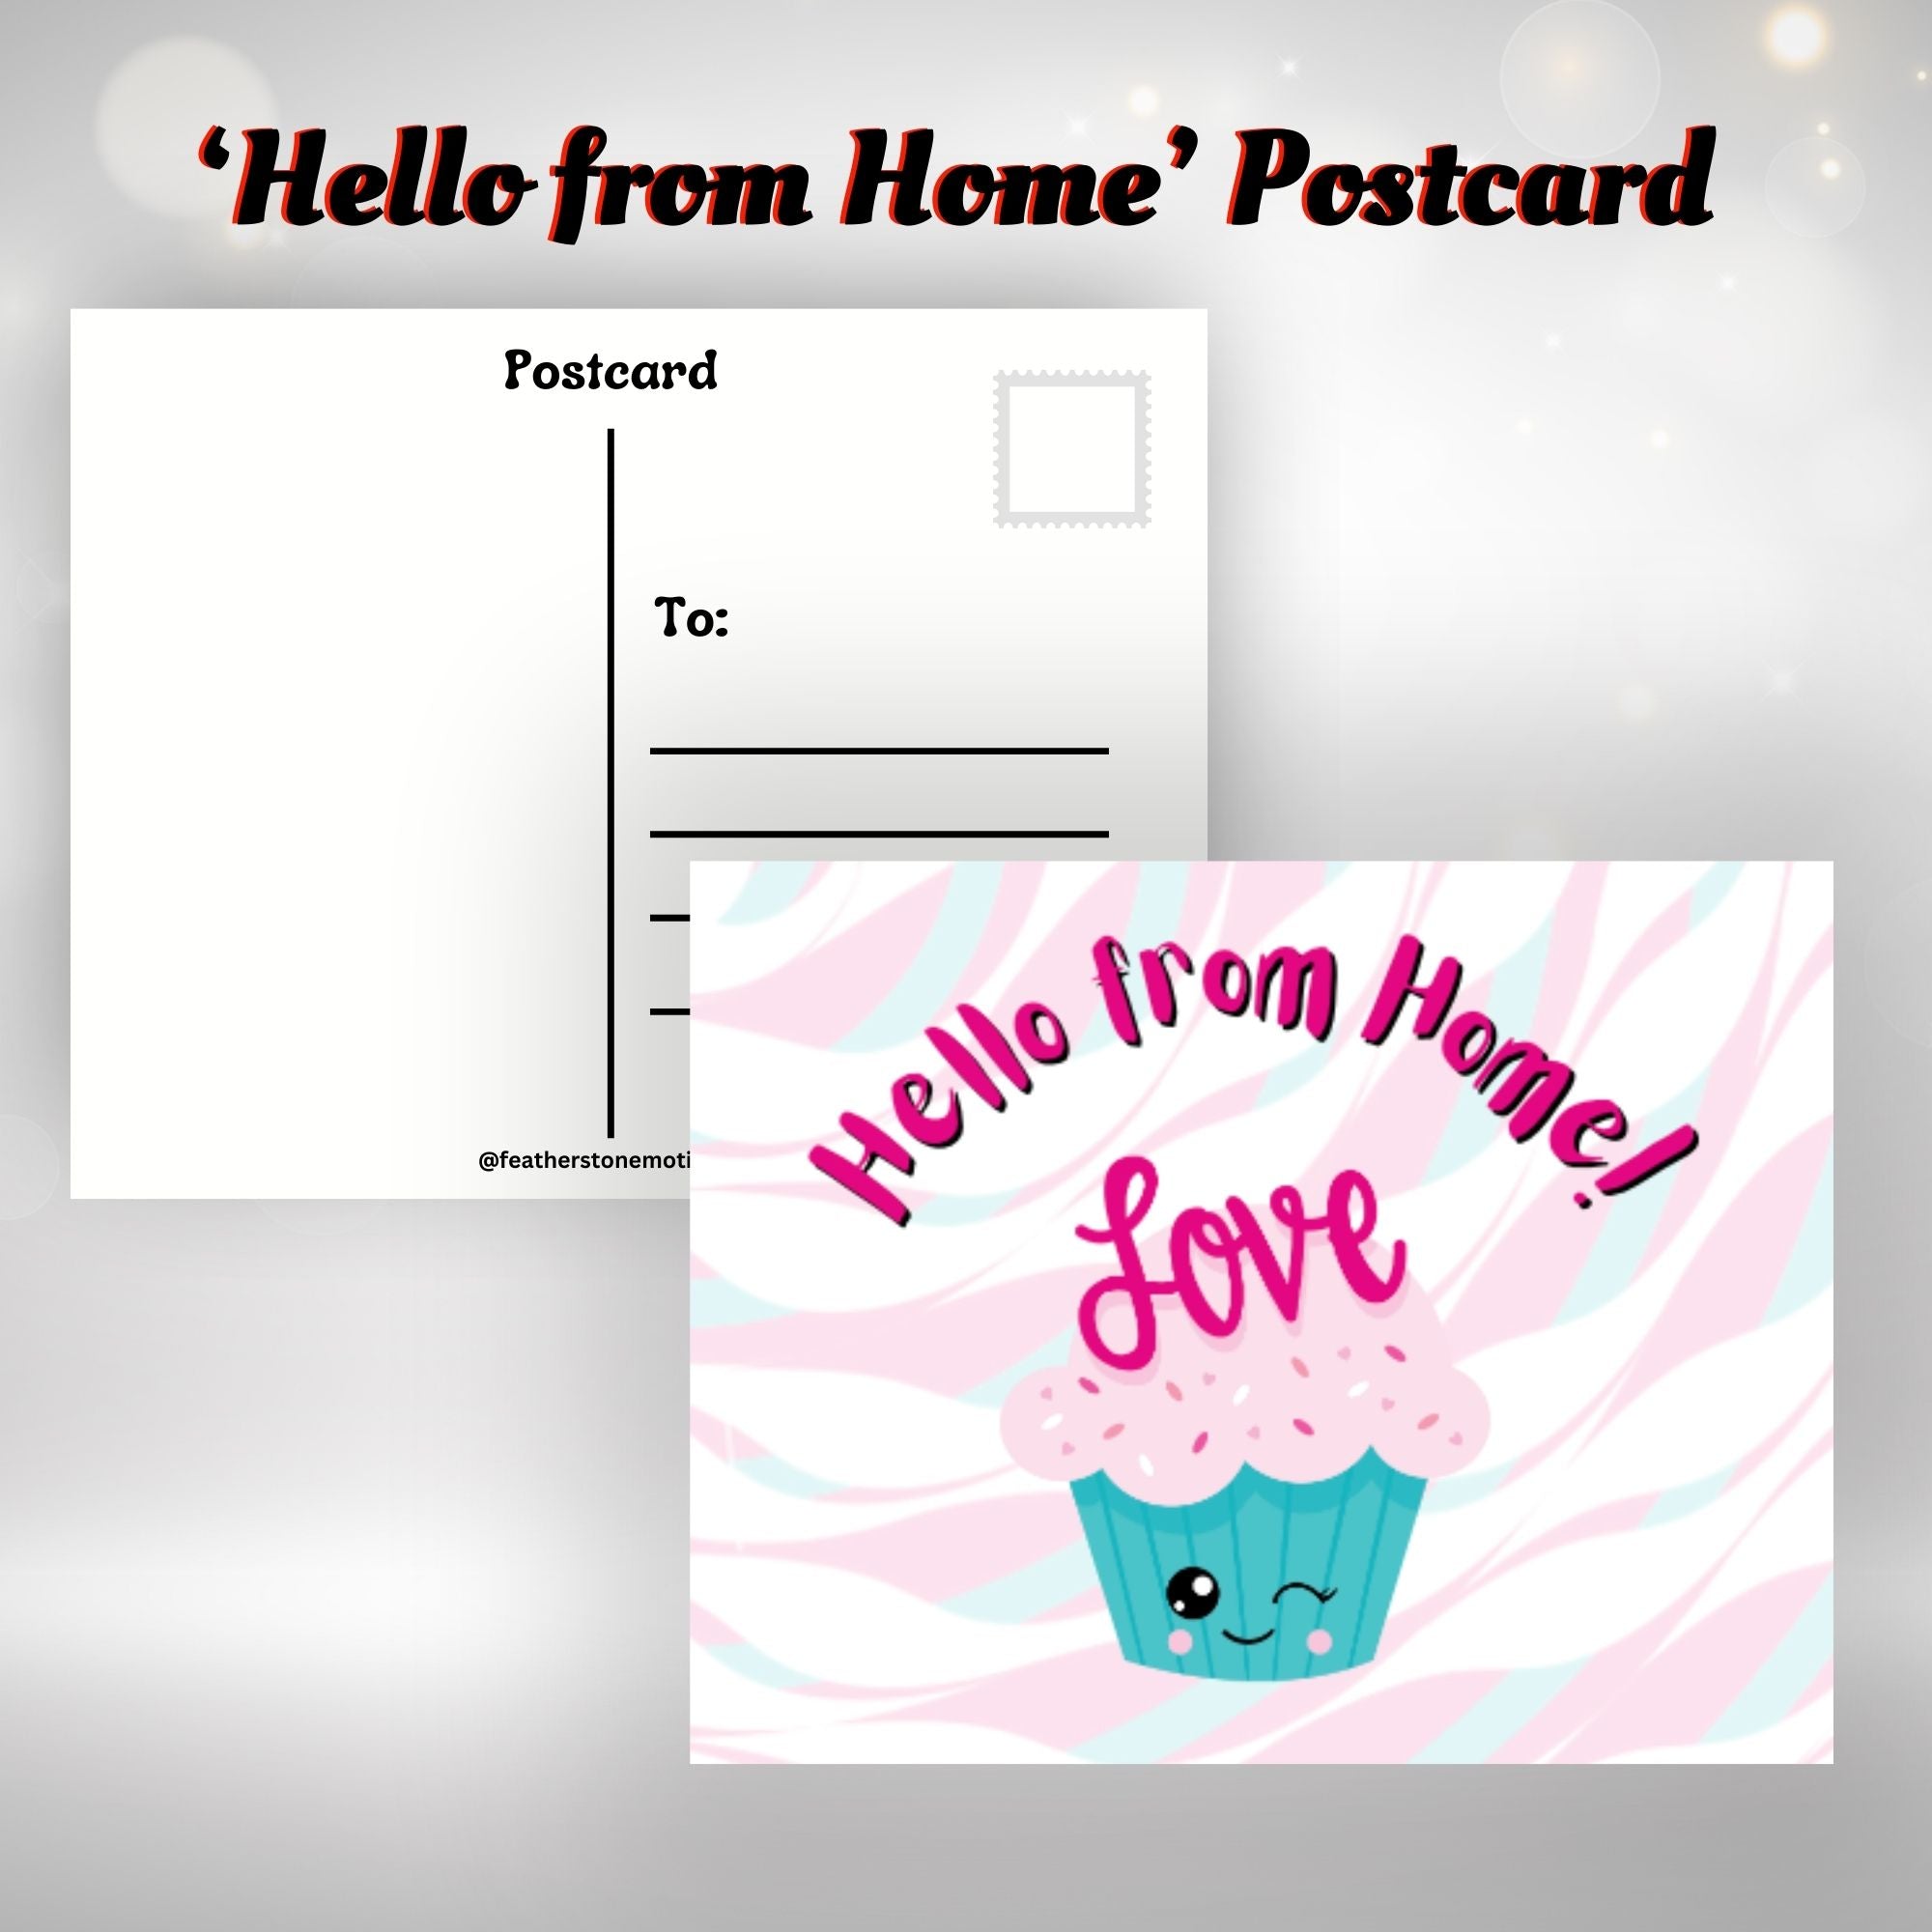 This image shows the Hello from Home! postcard with a winking cupcake with the word Love in it's frosting.